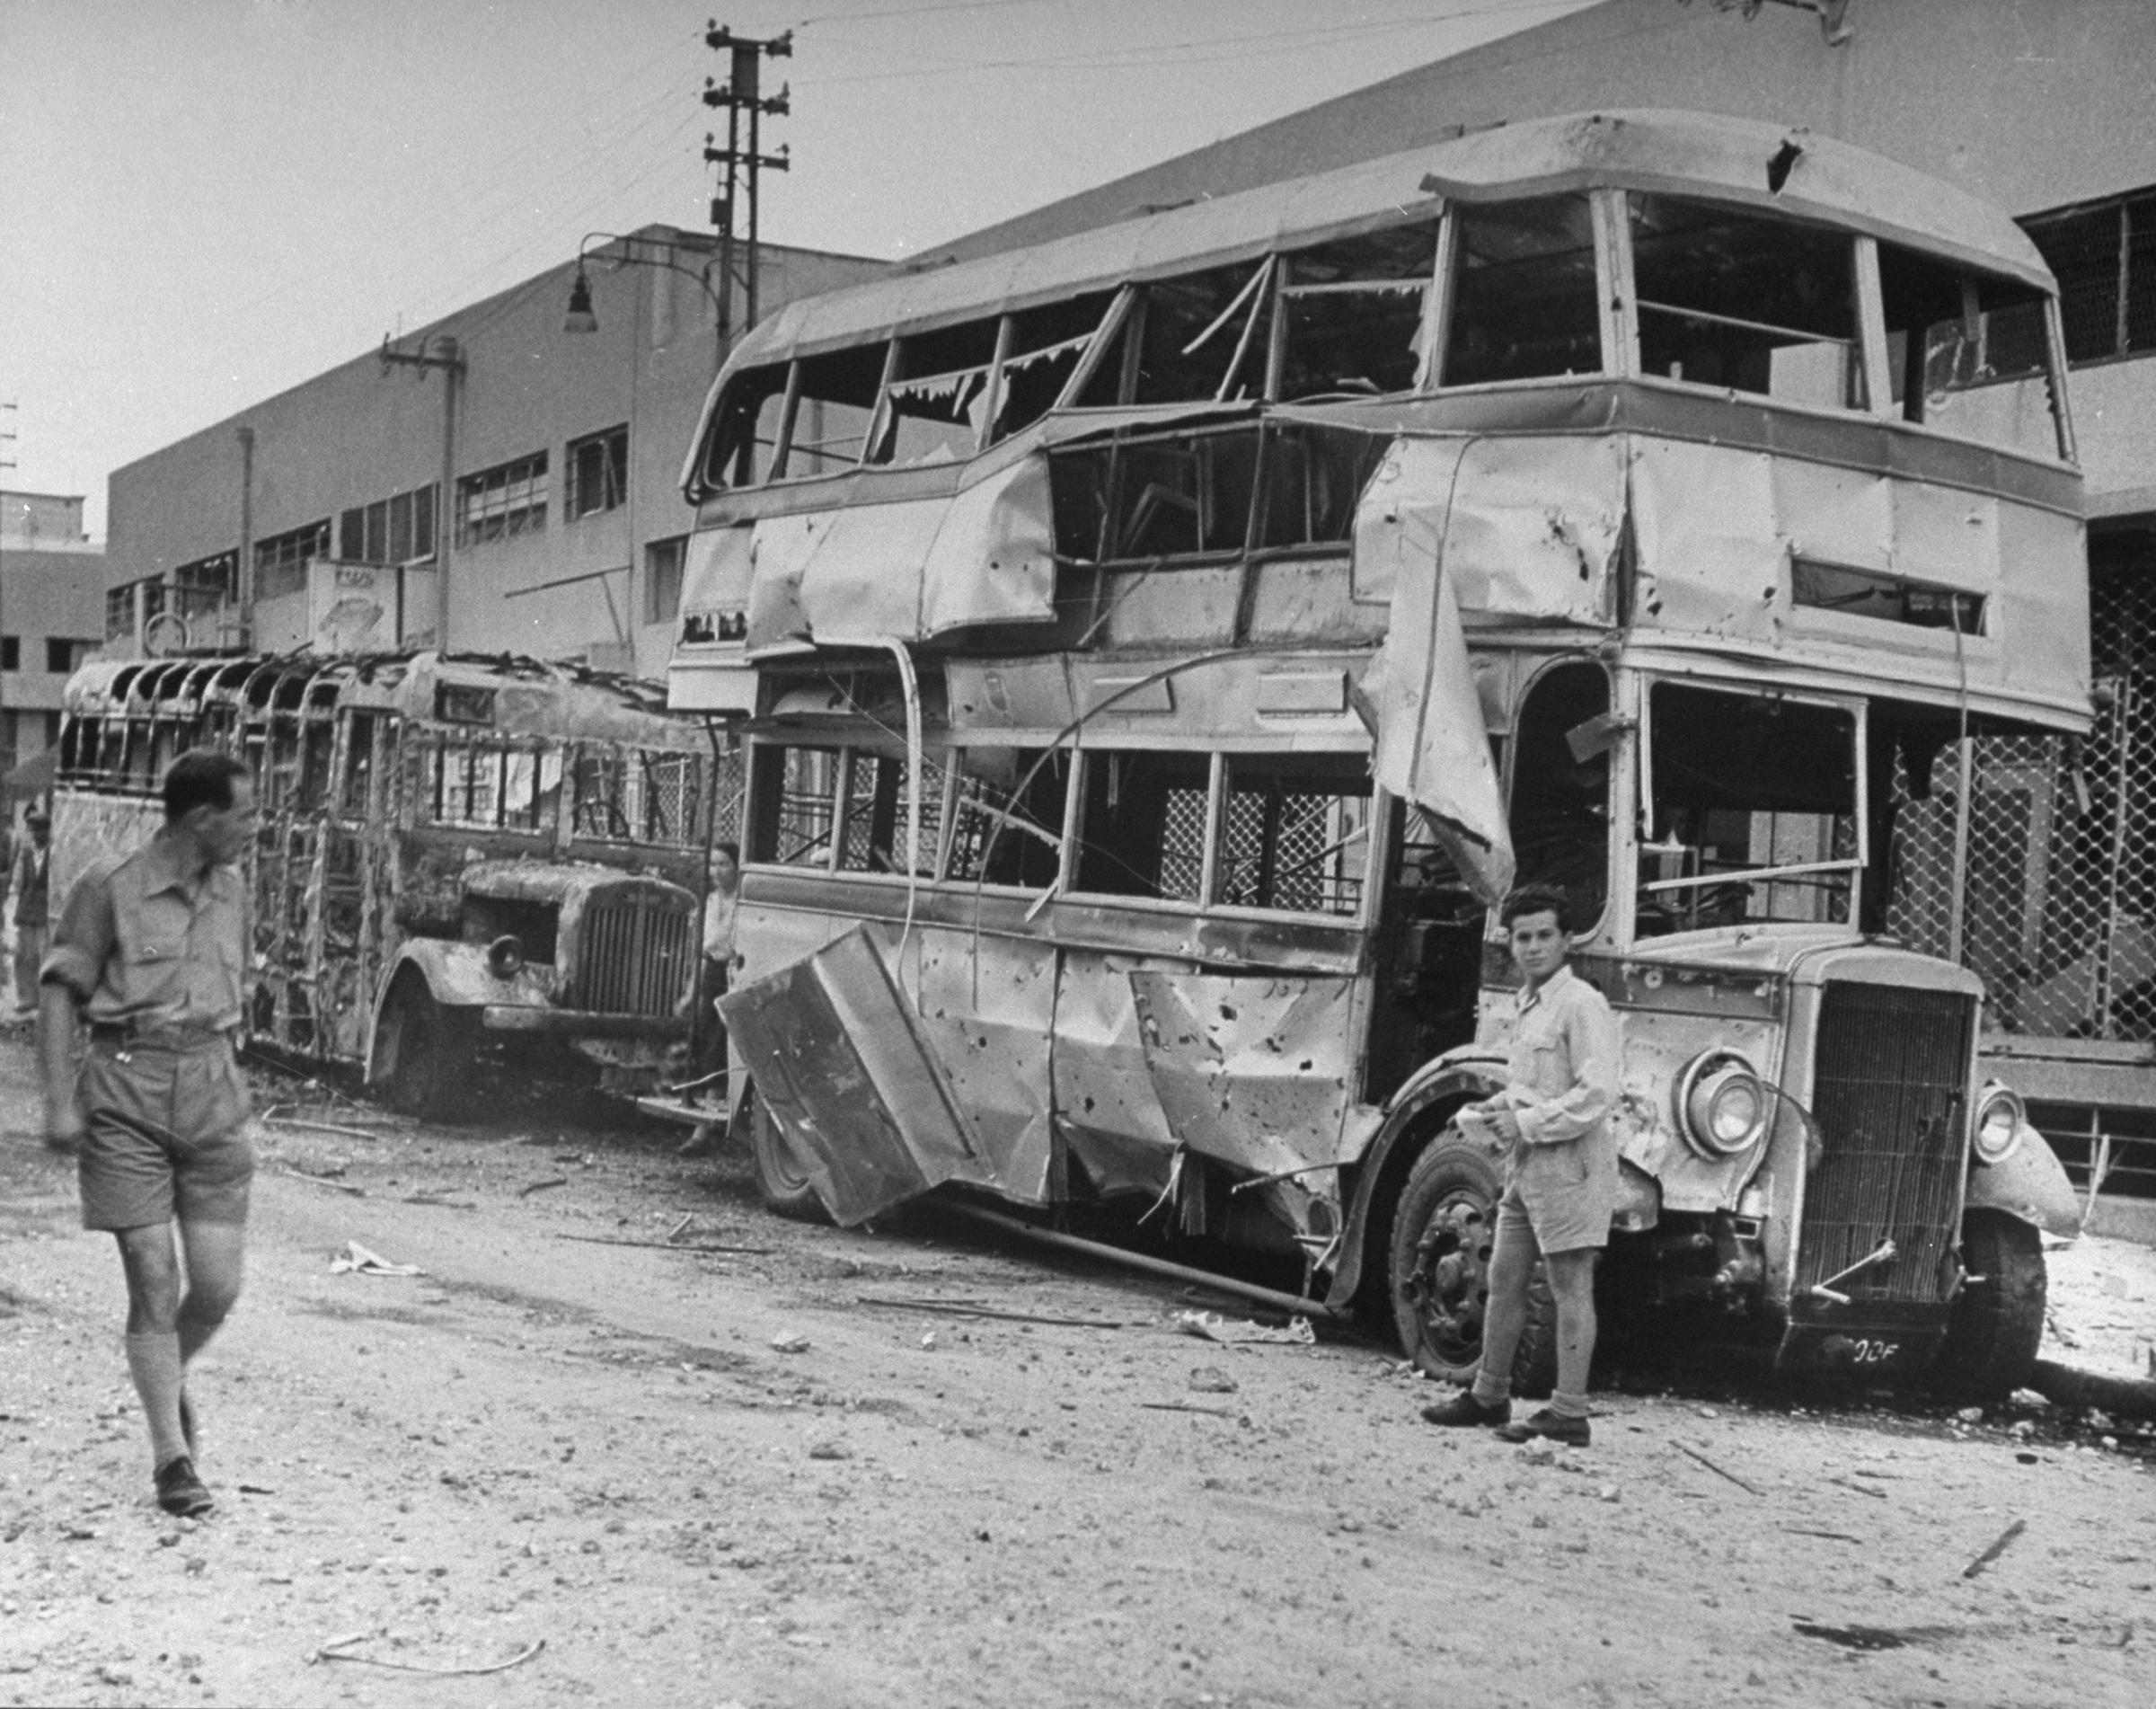 Burned-out buses seen shortly after the establishment of the state of Israel, exact location unknown, May 1948.